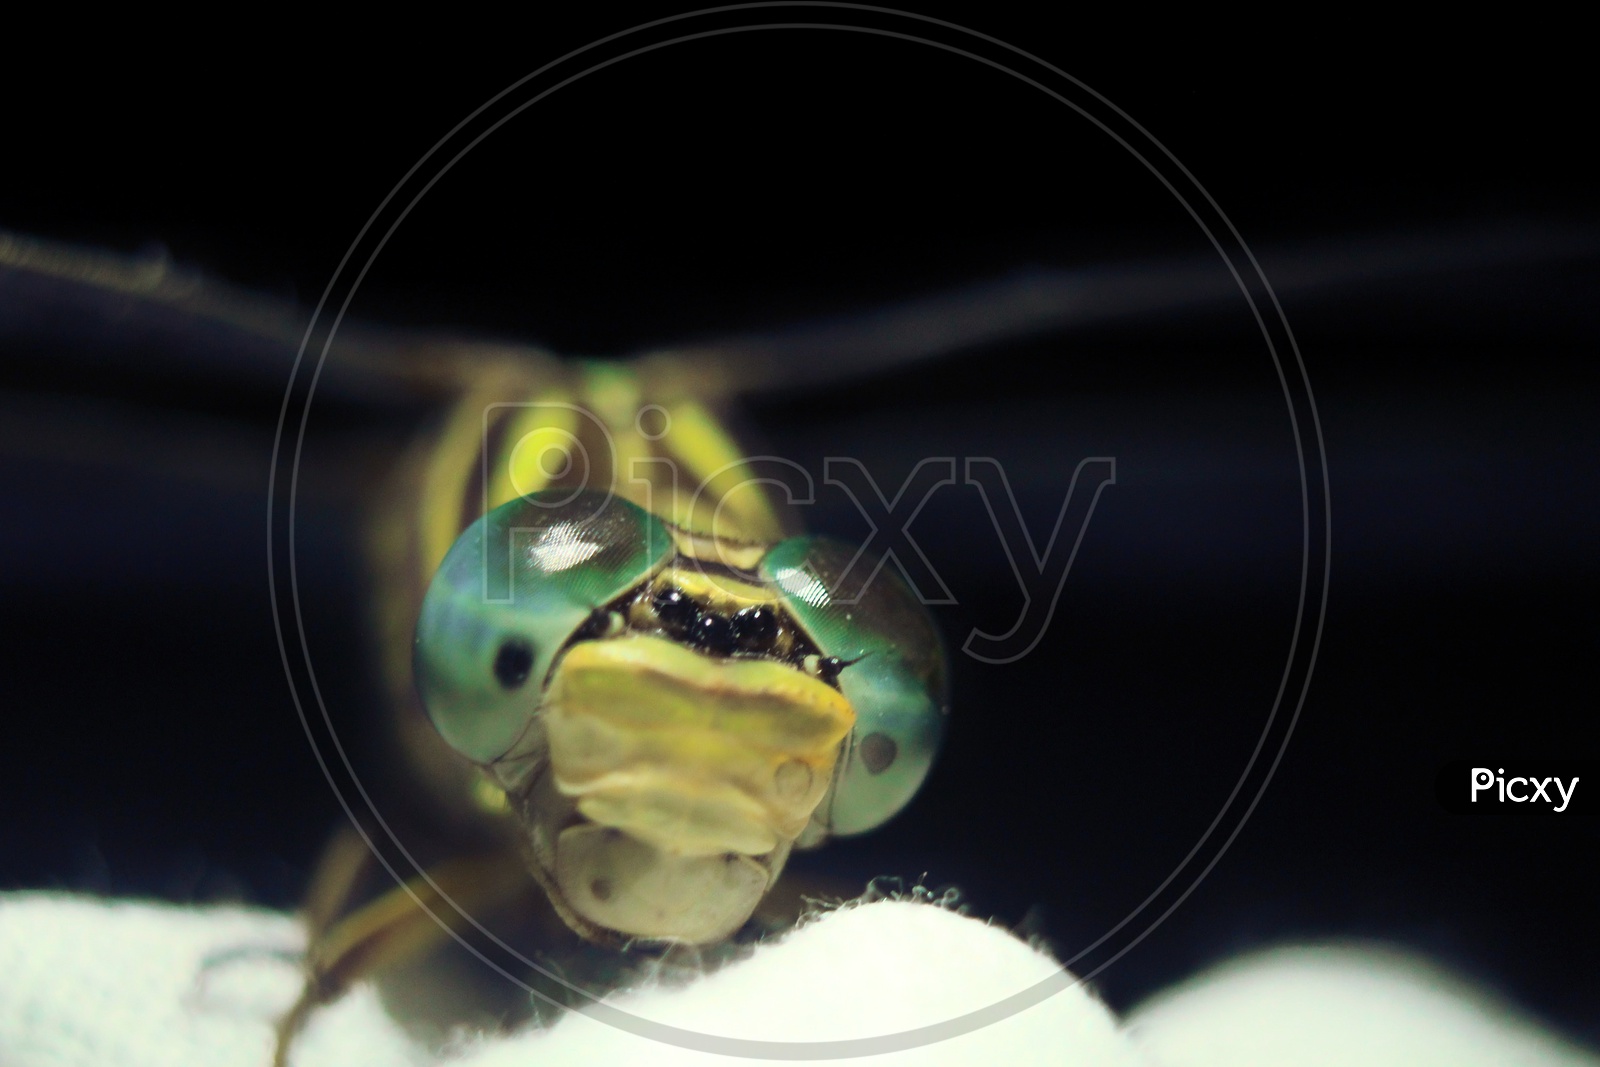 MACRO WORLD - IN FRAME (Lined hooktail (Paragomphus lineatus))